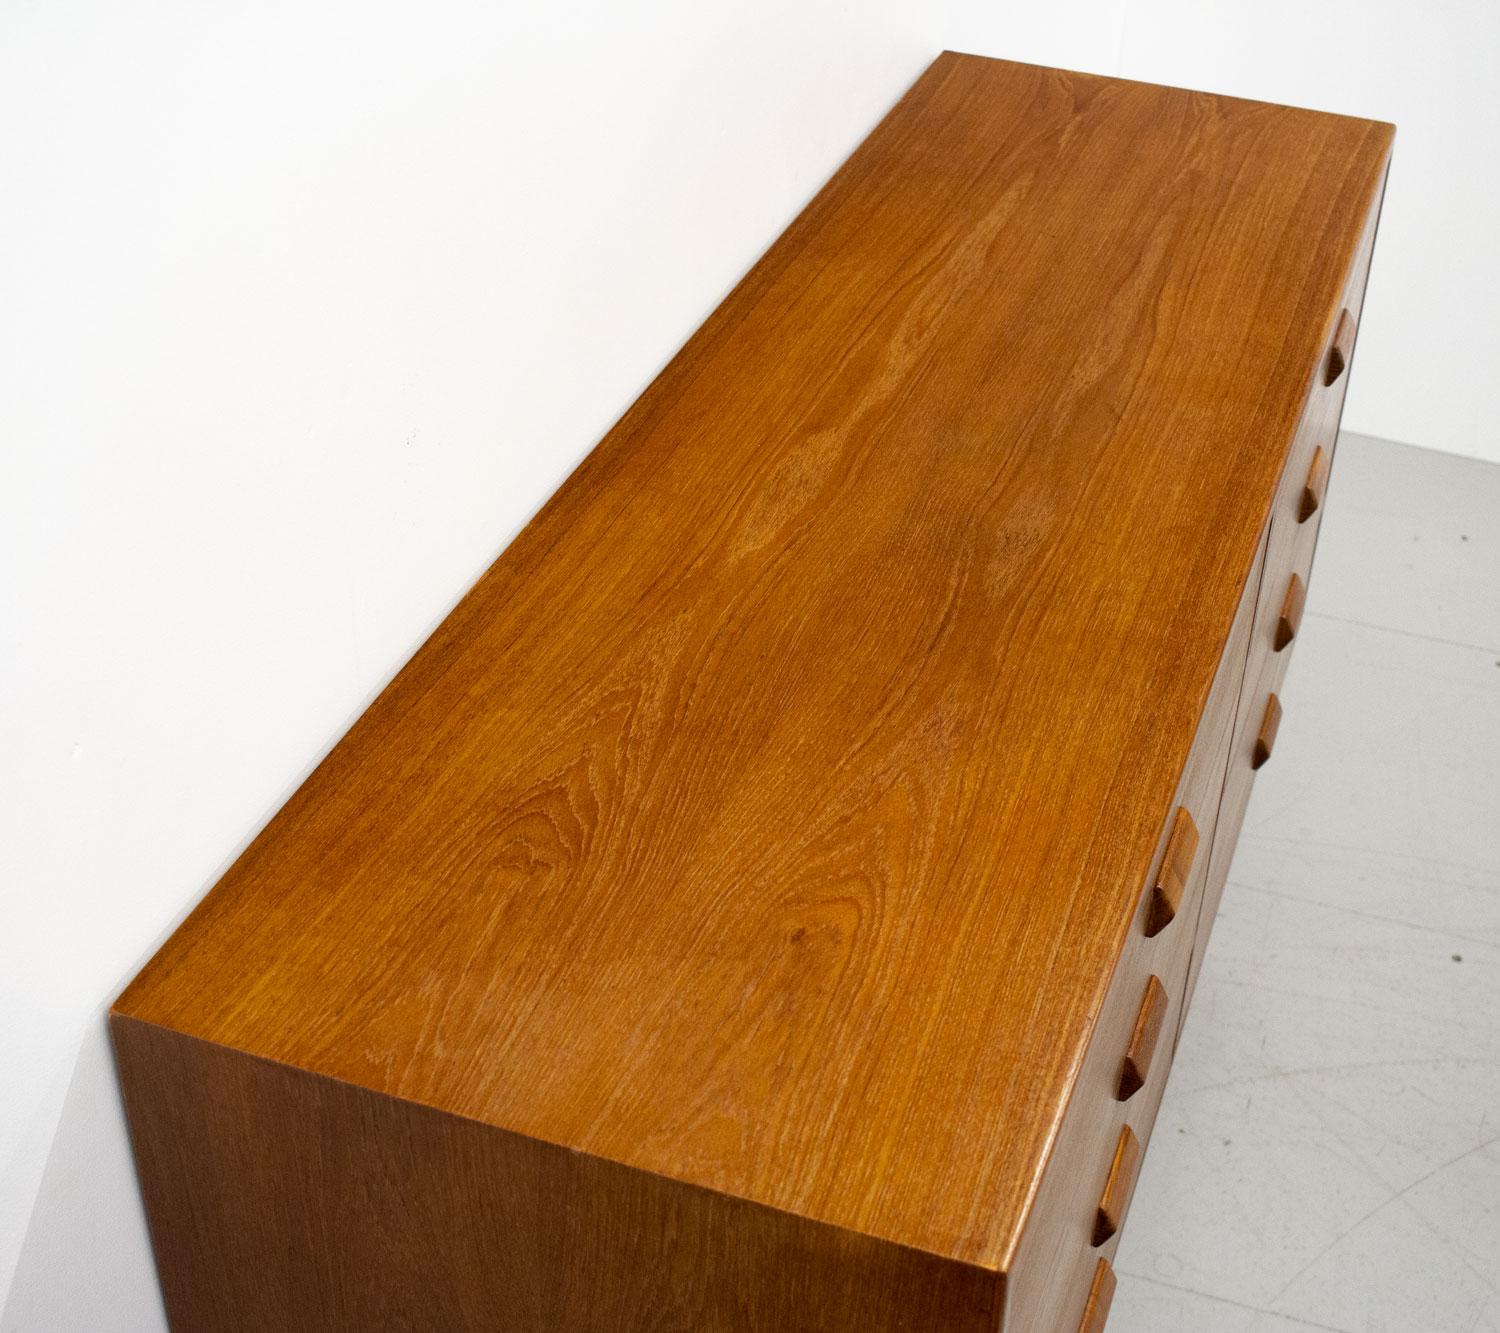 1950s Danish teak large chest of drawers designed by Børge Mogensen for Søborg Møbelfabrik. Børge Mogensen’s designs are often understated and beautifully made and this is a classic piece. It has lots of storage space with 8 good sized drawers that